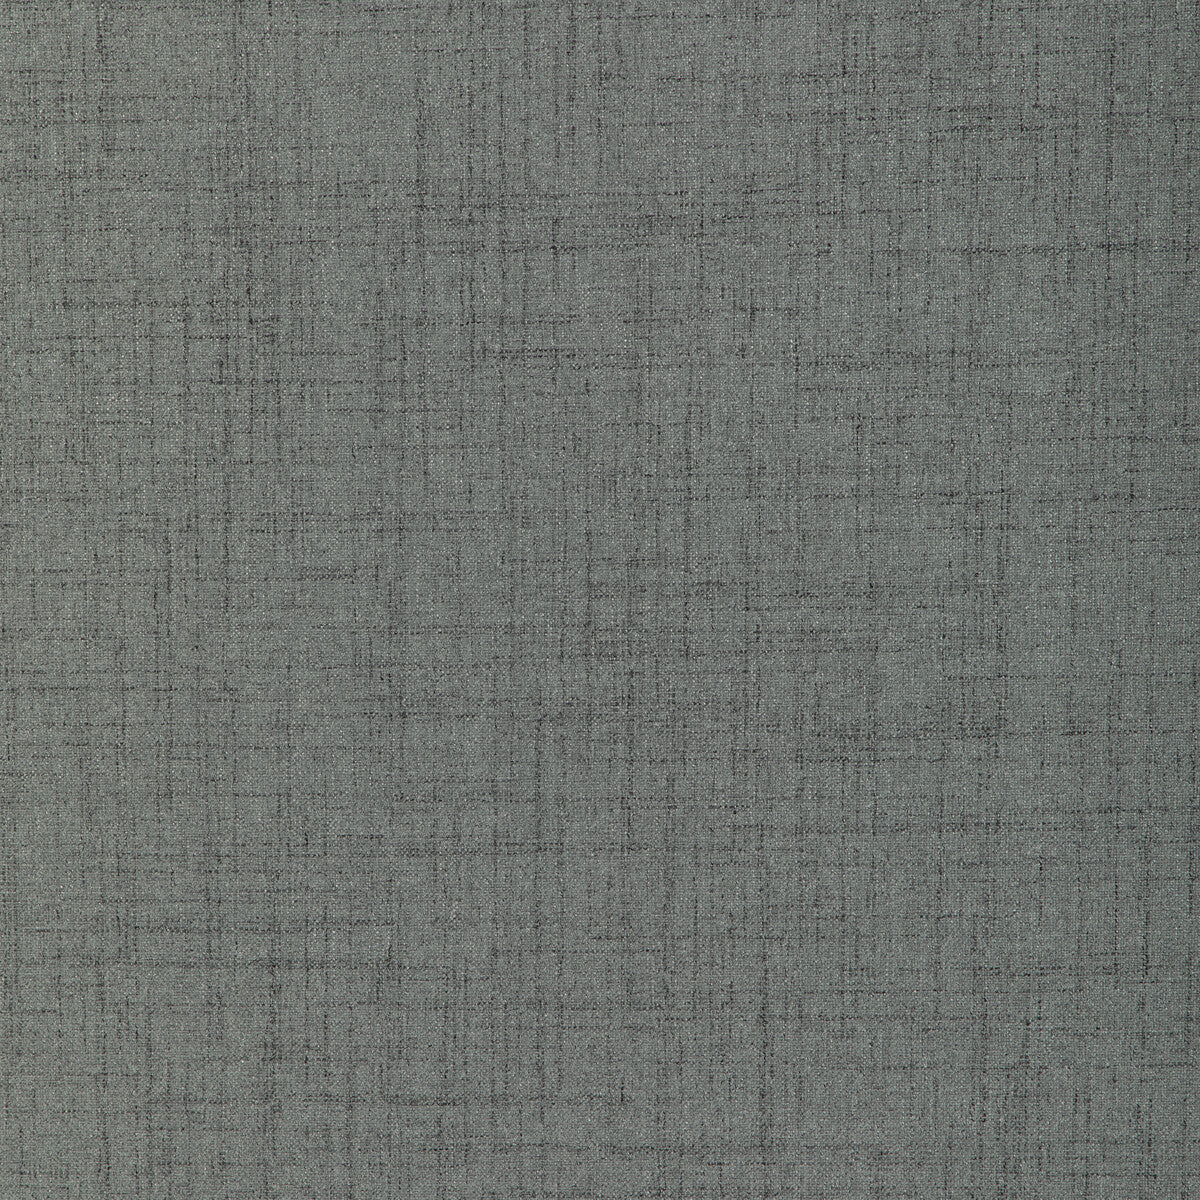 Kravet Contract fabric in 90016-1121 color - pattern 90016.1121.0 - by Kravet Contract in the Fr Window Blackout Drapery III collection